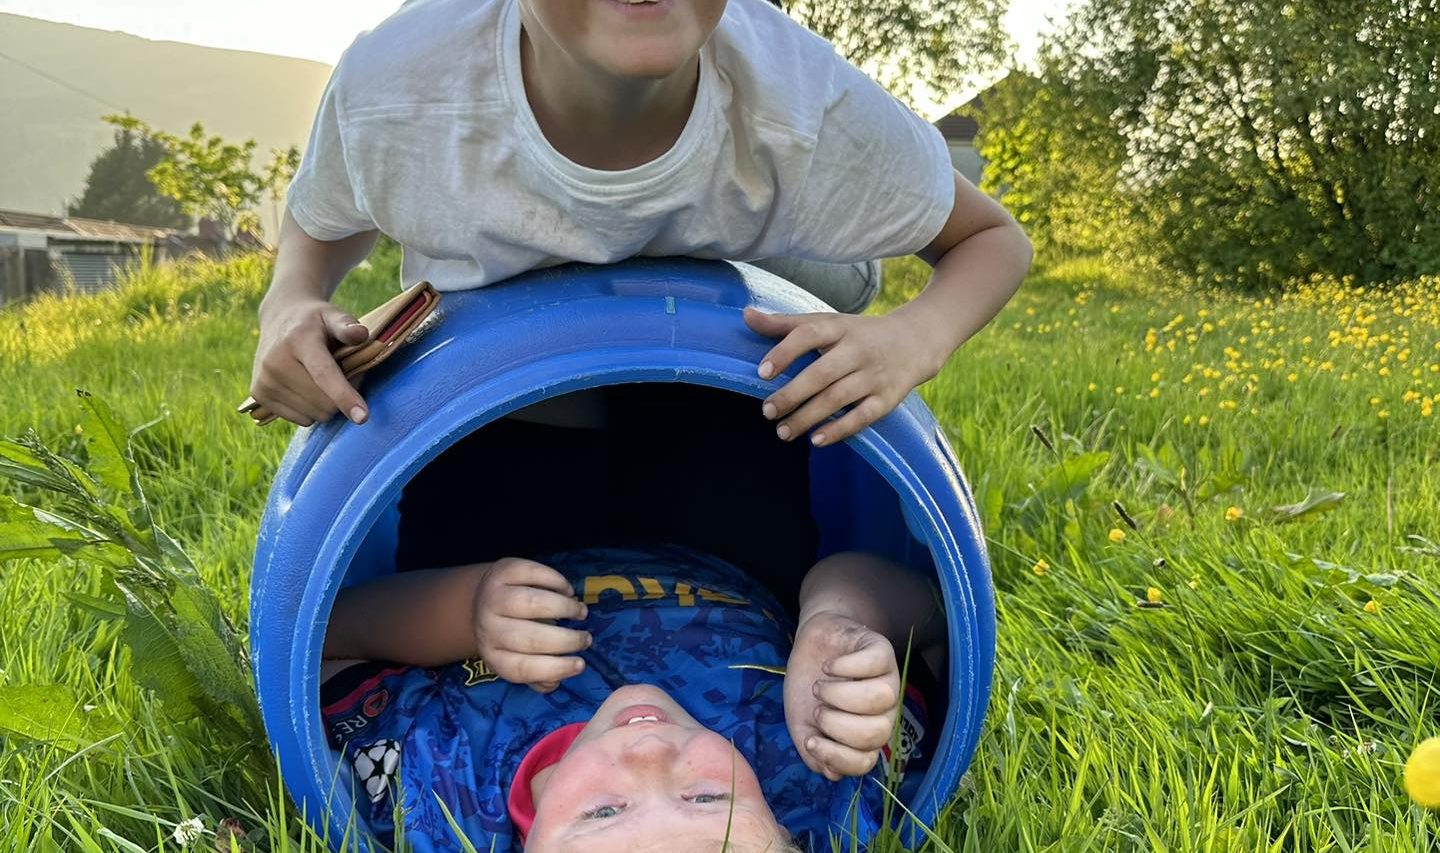 Young boy in a blue tube, with another boy on top of the tube